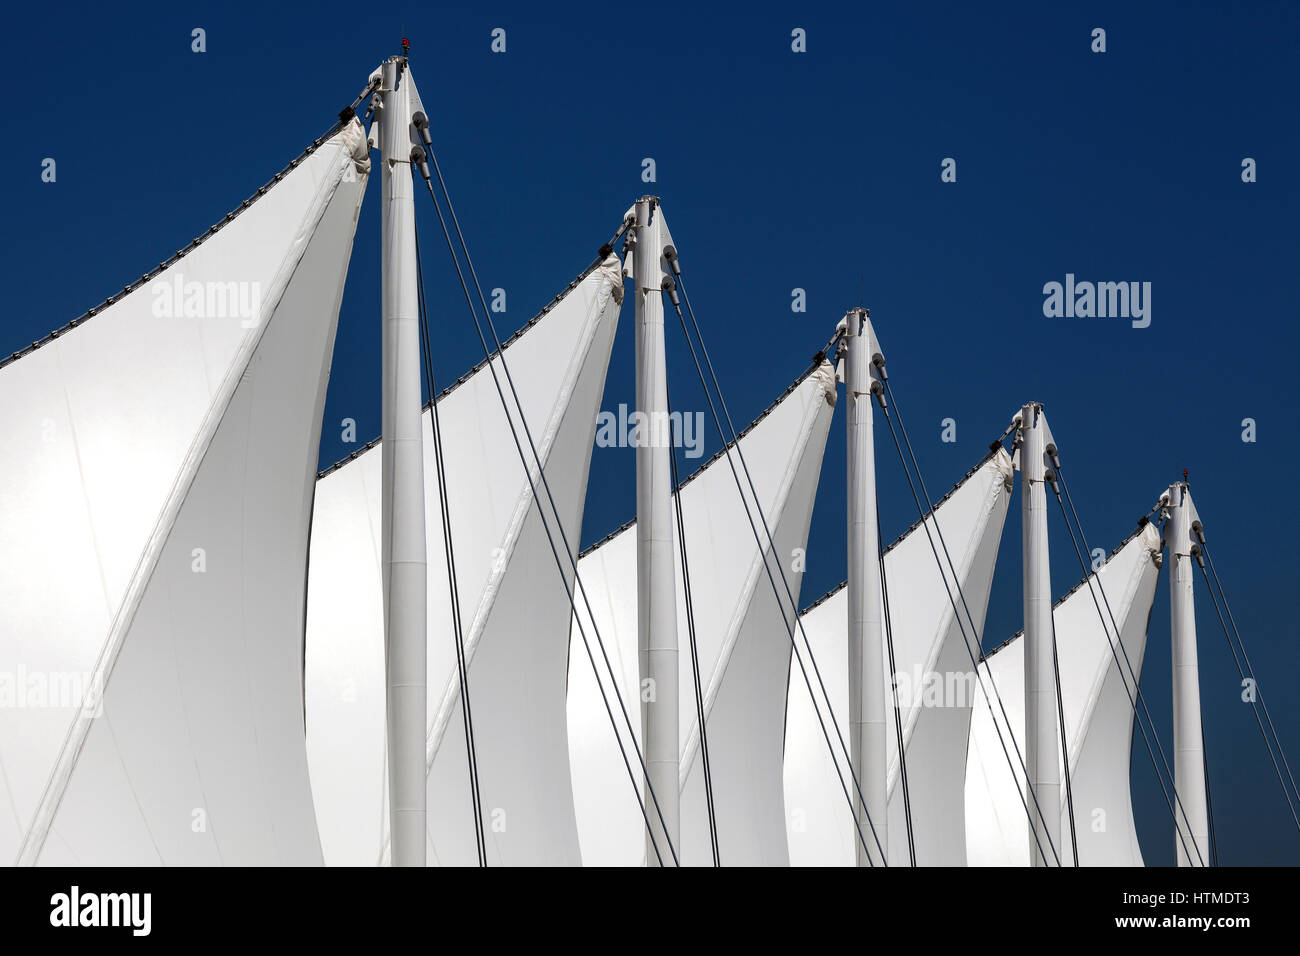 Detail Sail, fair and congress center Canada Place, architect Ed Zeidler, Vancouver, British Columbia Province, Canada Stock Photo